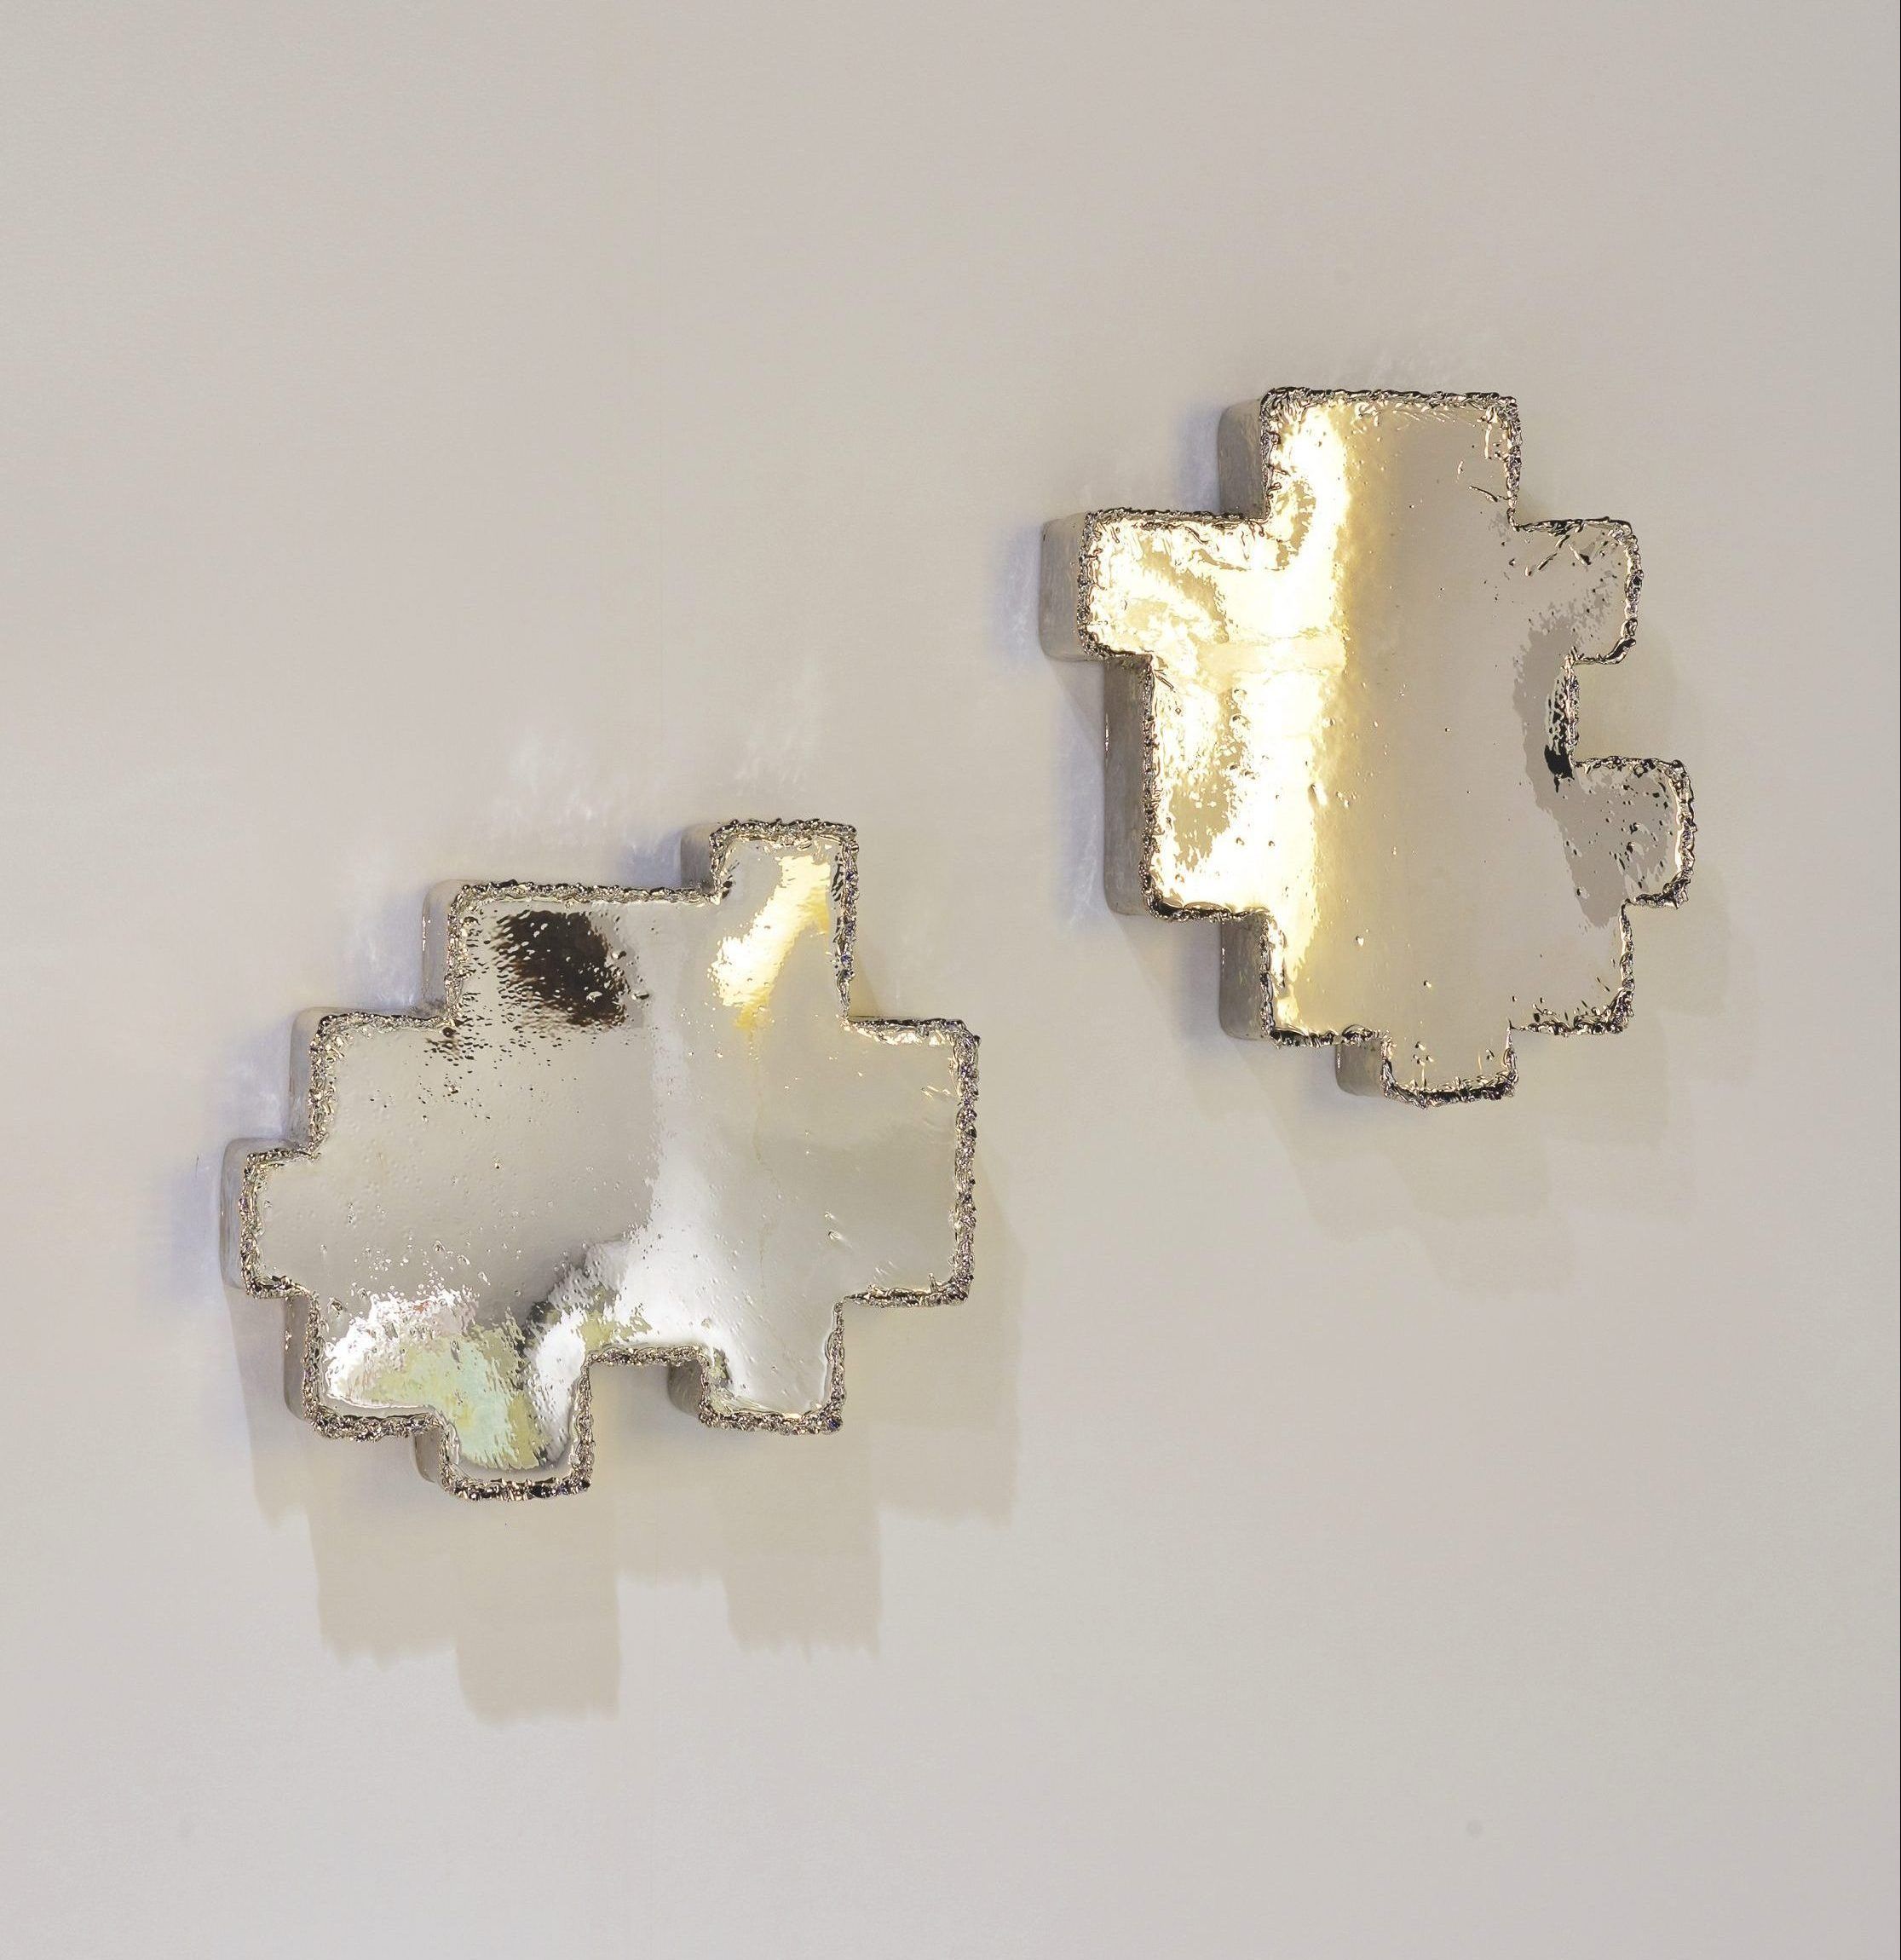 © Studio Nucleo Metal Fossil Nickel Mirrors AP1 and AP2 courtesy ammann//gallery